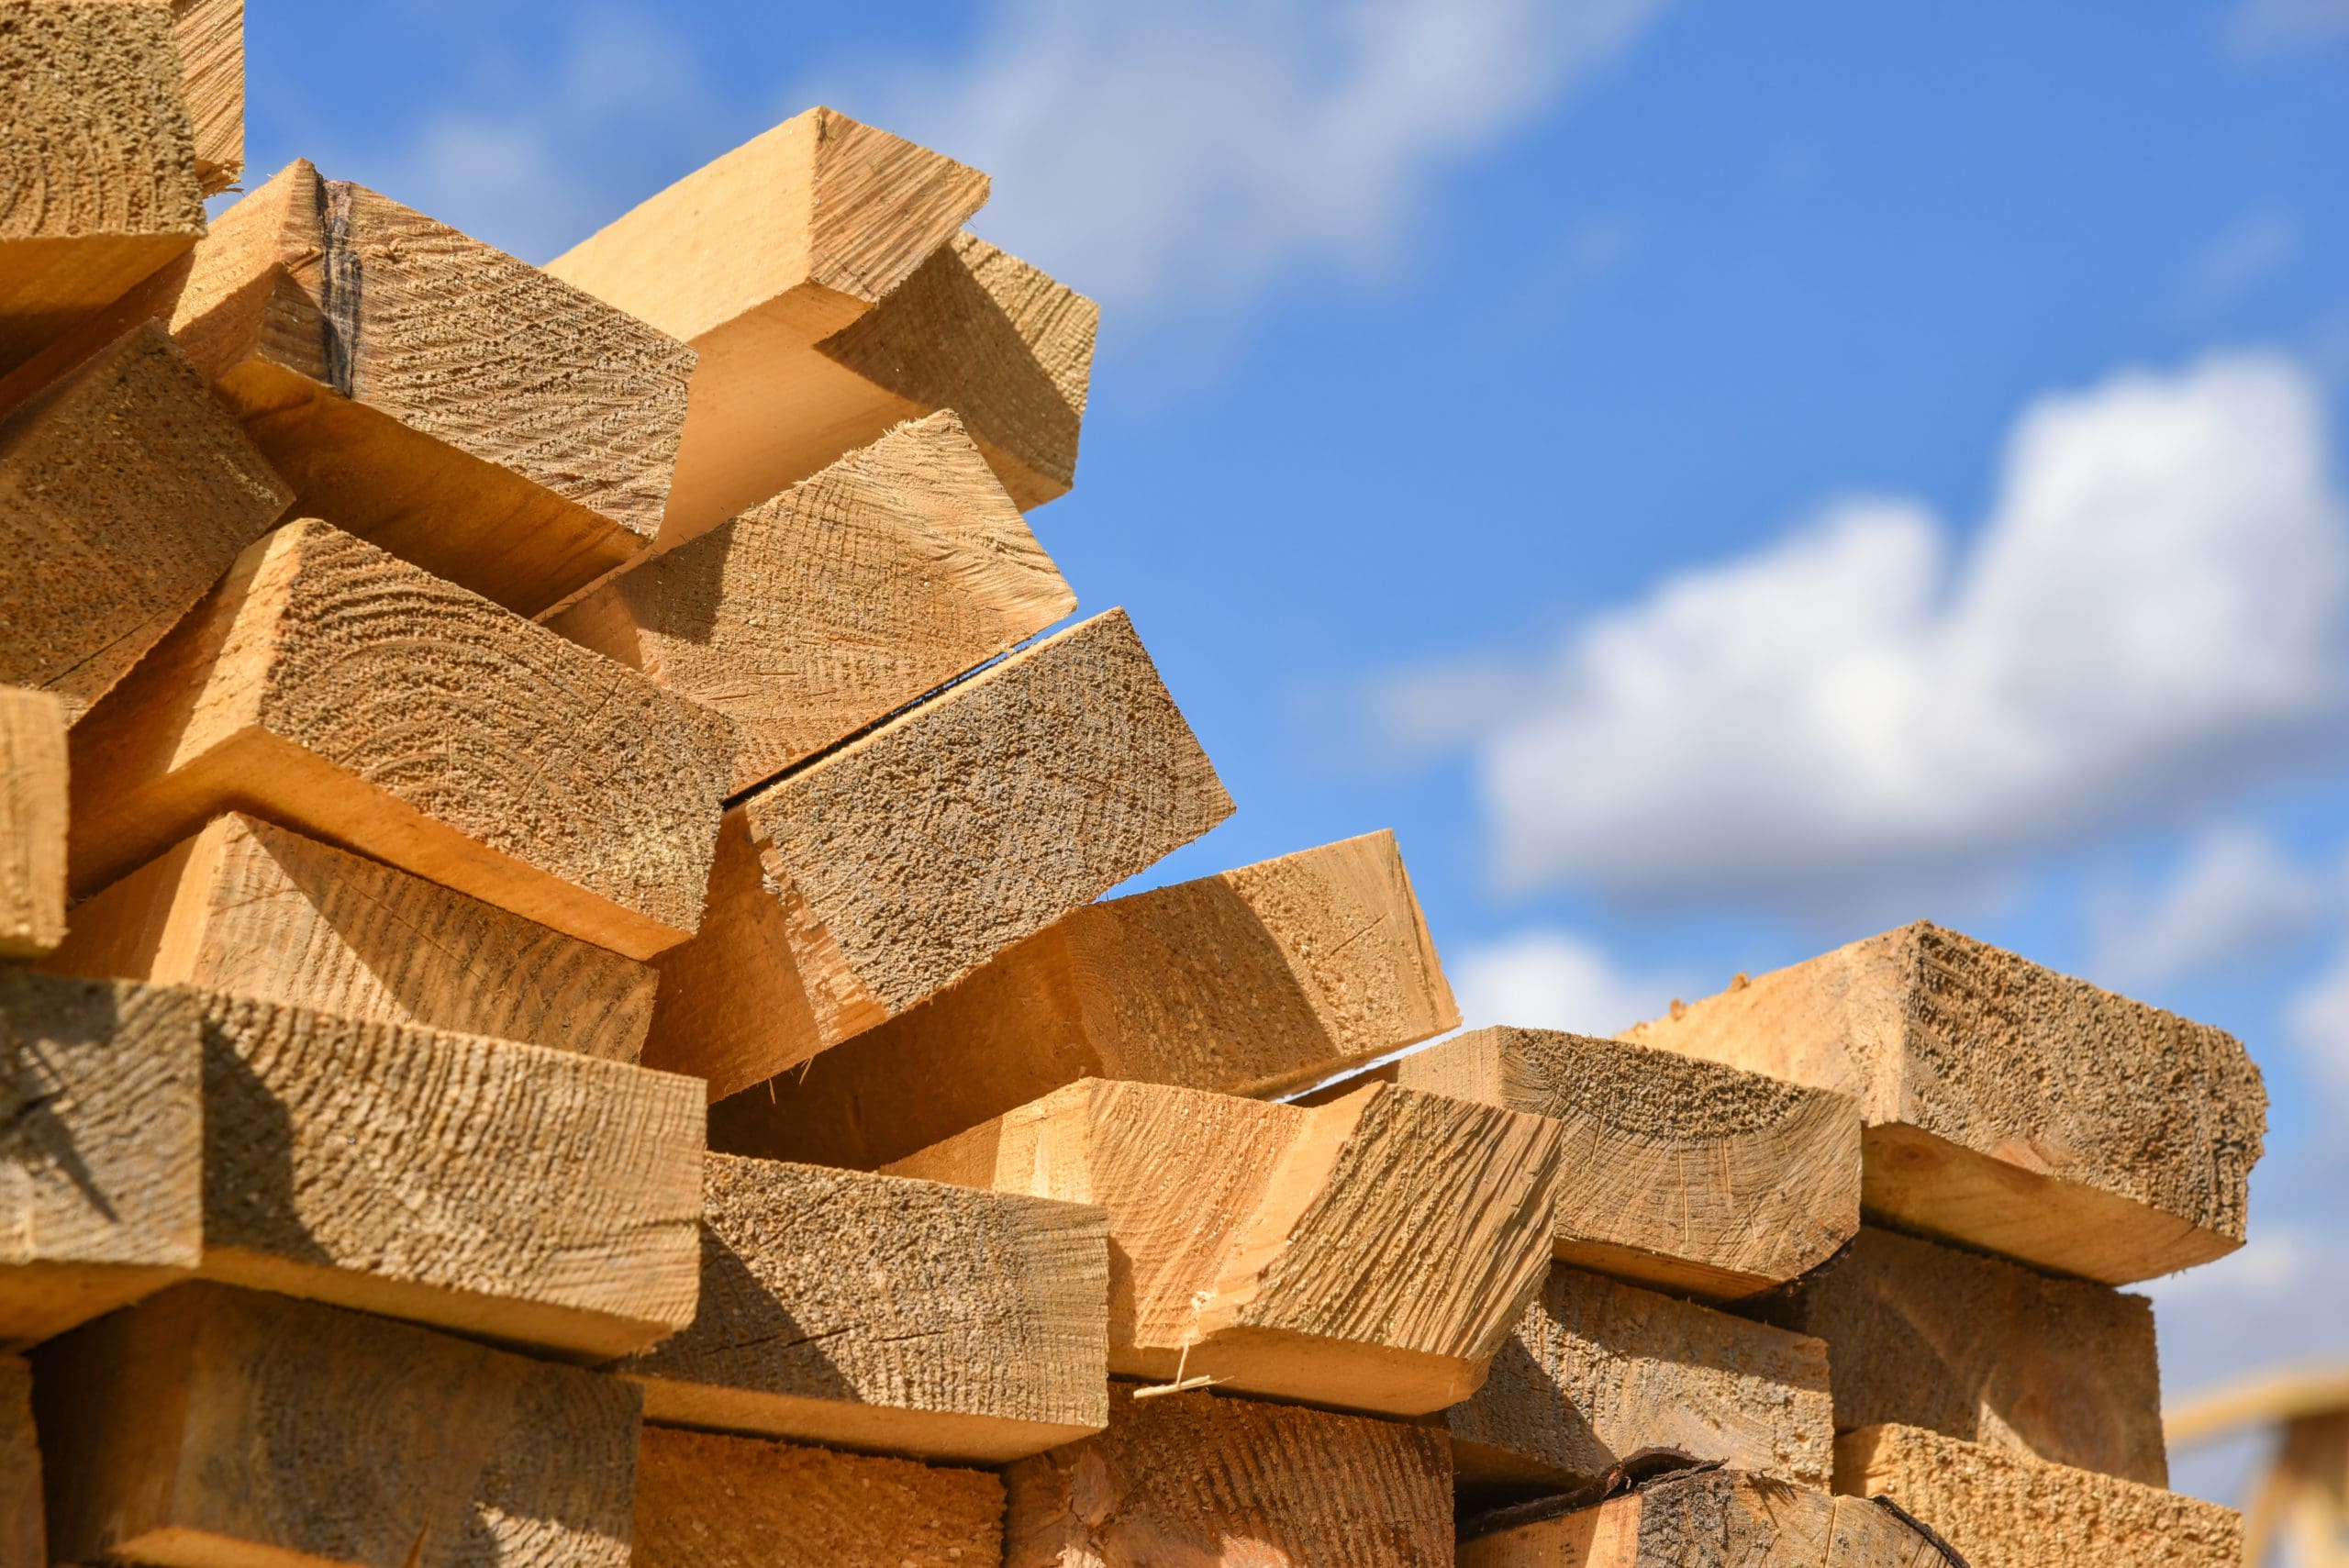 wood stacked on itself with blue sky in the background, a reference to lumber prices